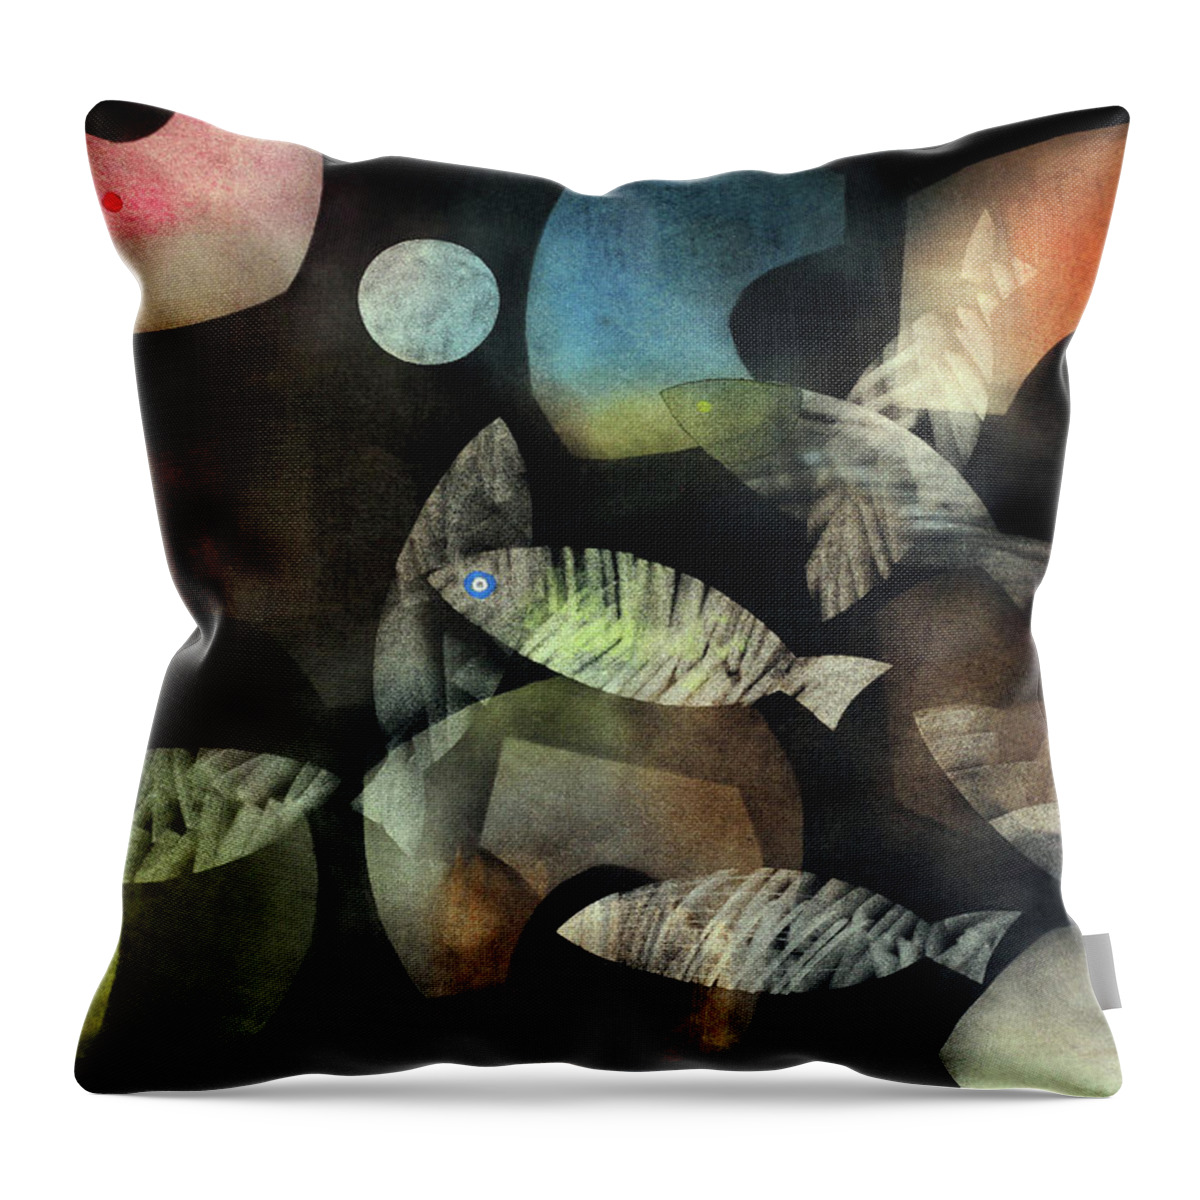 Abstract Throw Pillow featuring the painting Fish Moon by Winston Saoli 1950-1995